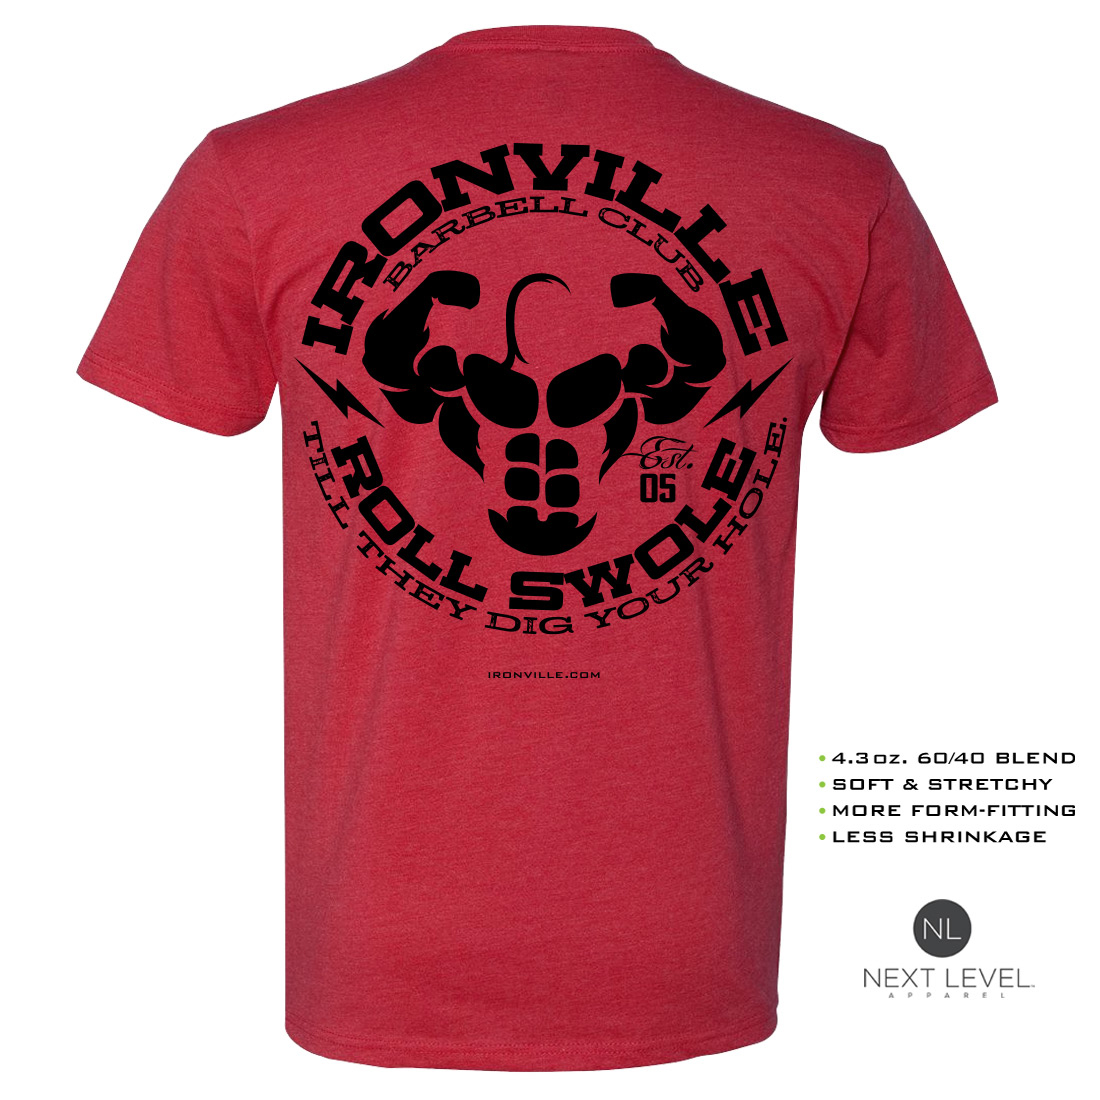 Roll Blend Club They Hole T-Shirt Till Swole Soft Barbell Fitted Your Ironville Dig